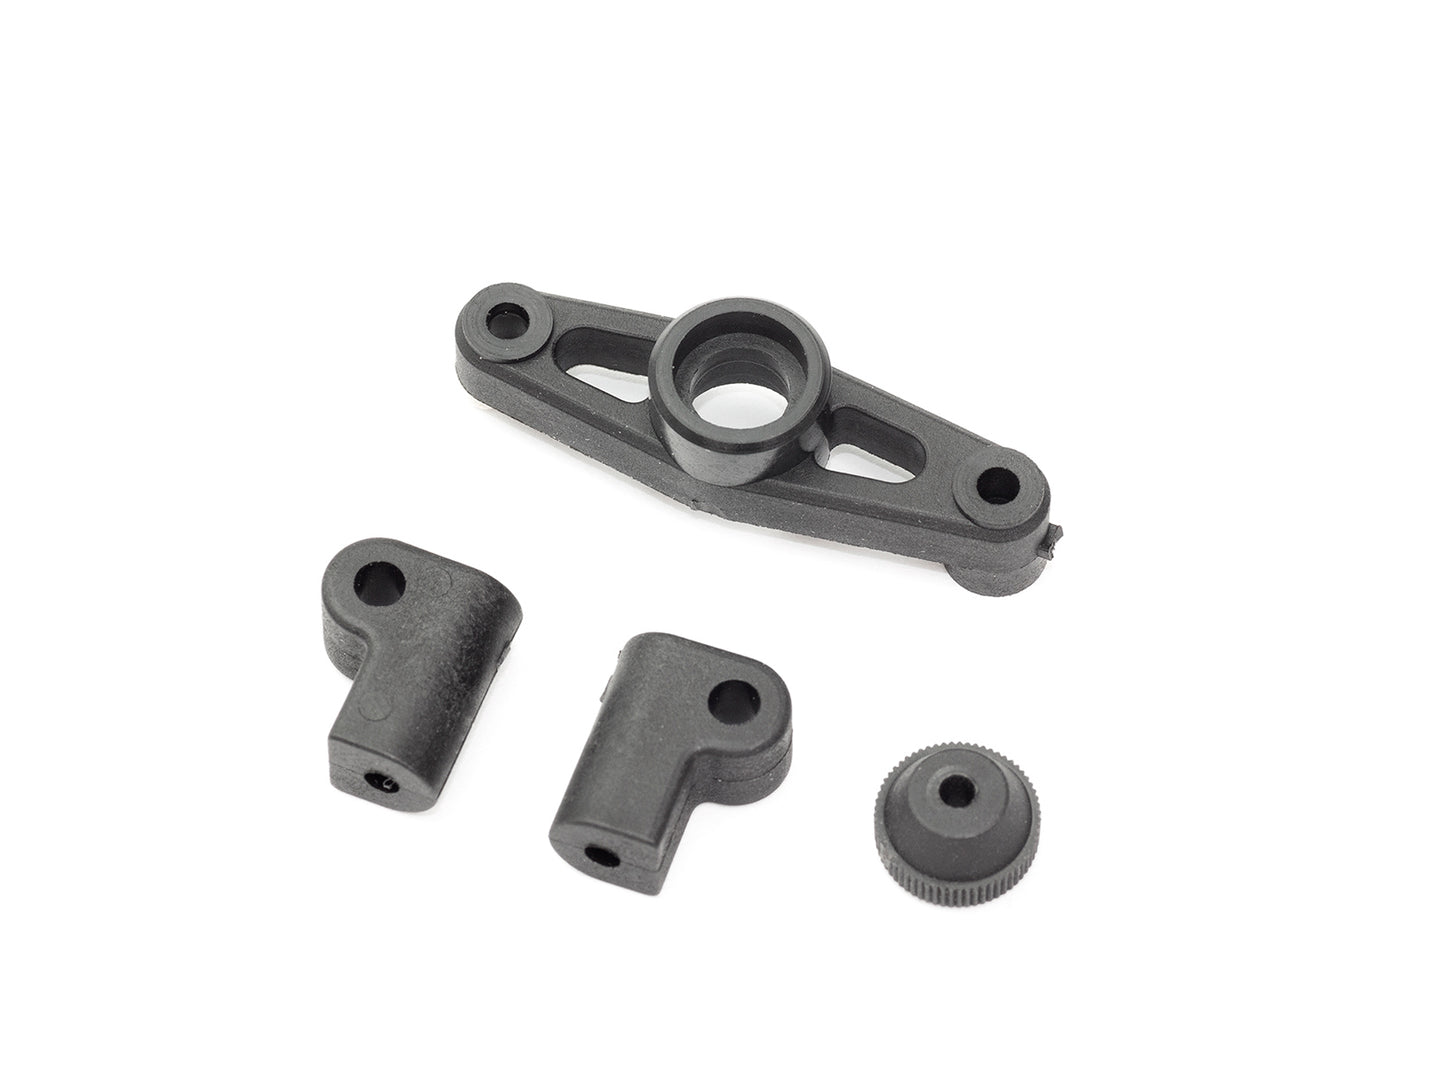 R0369 - LINKAGE PARTS (IF18-3)